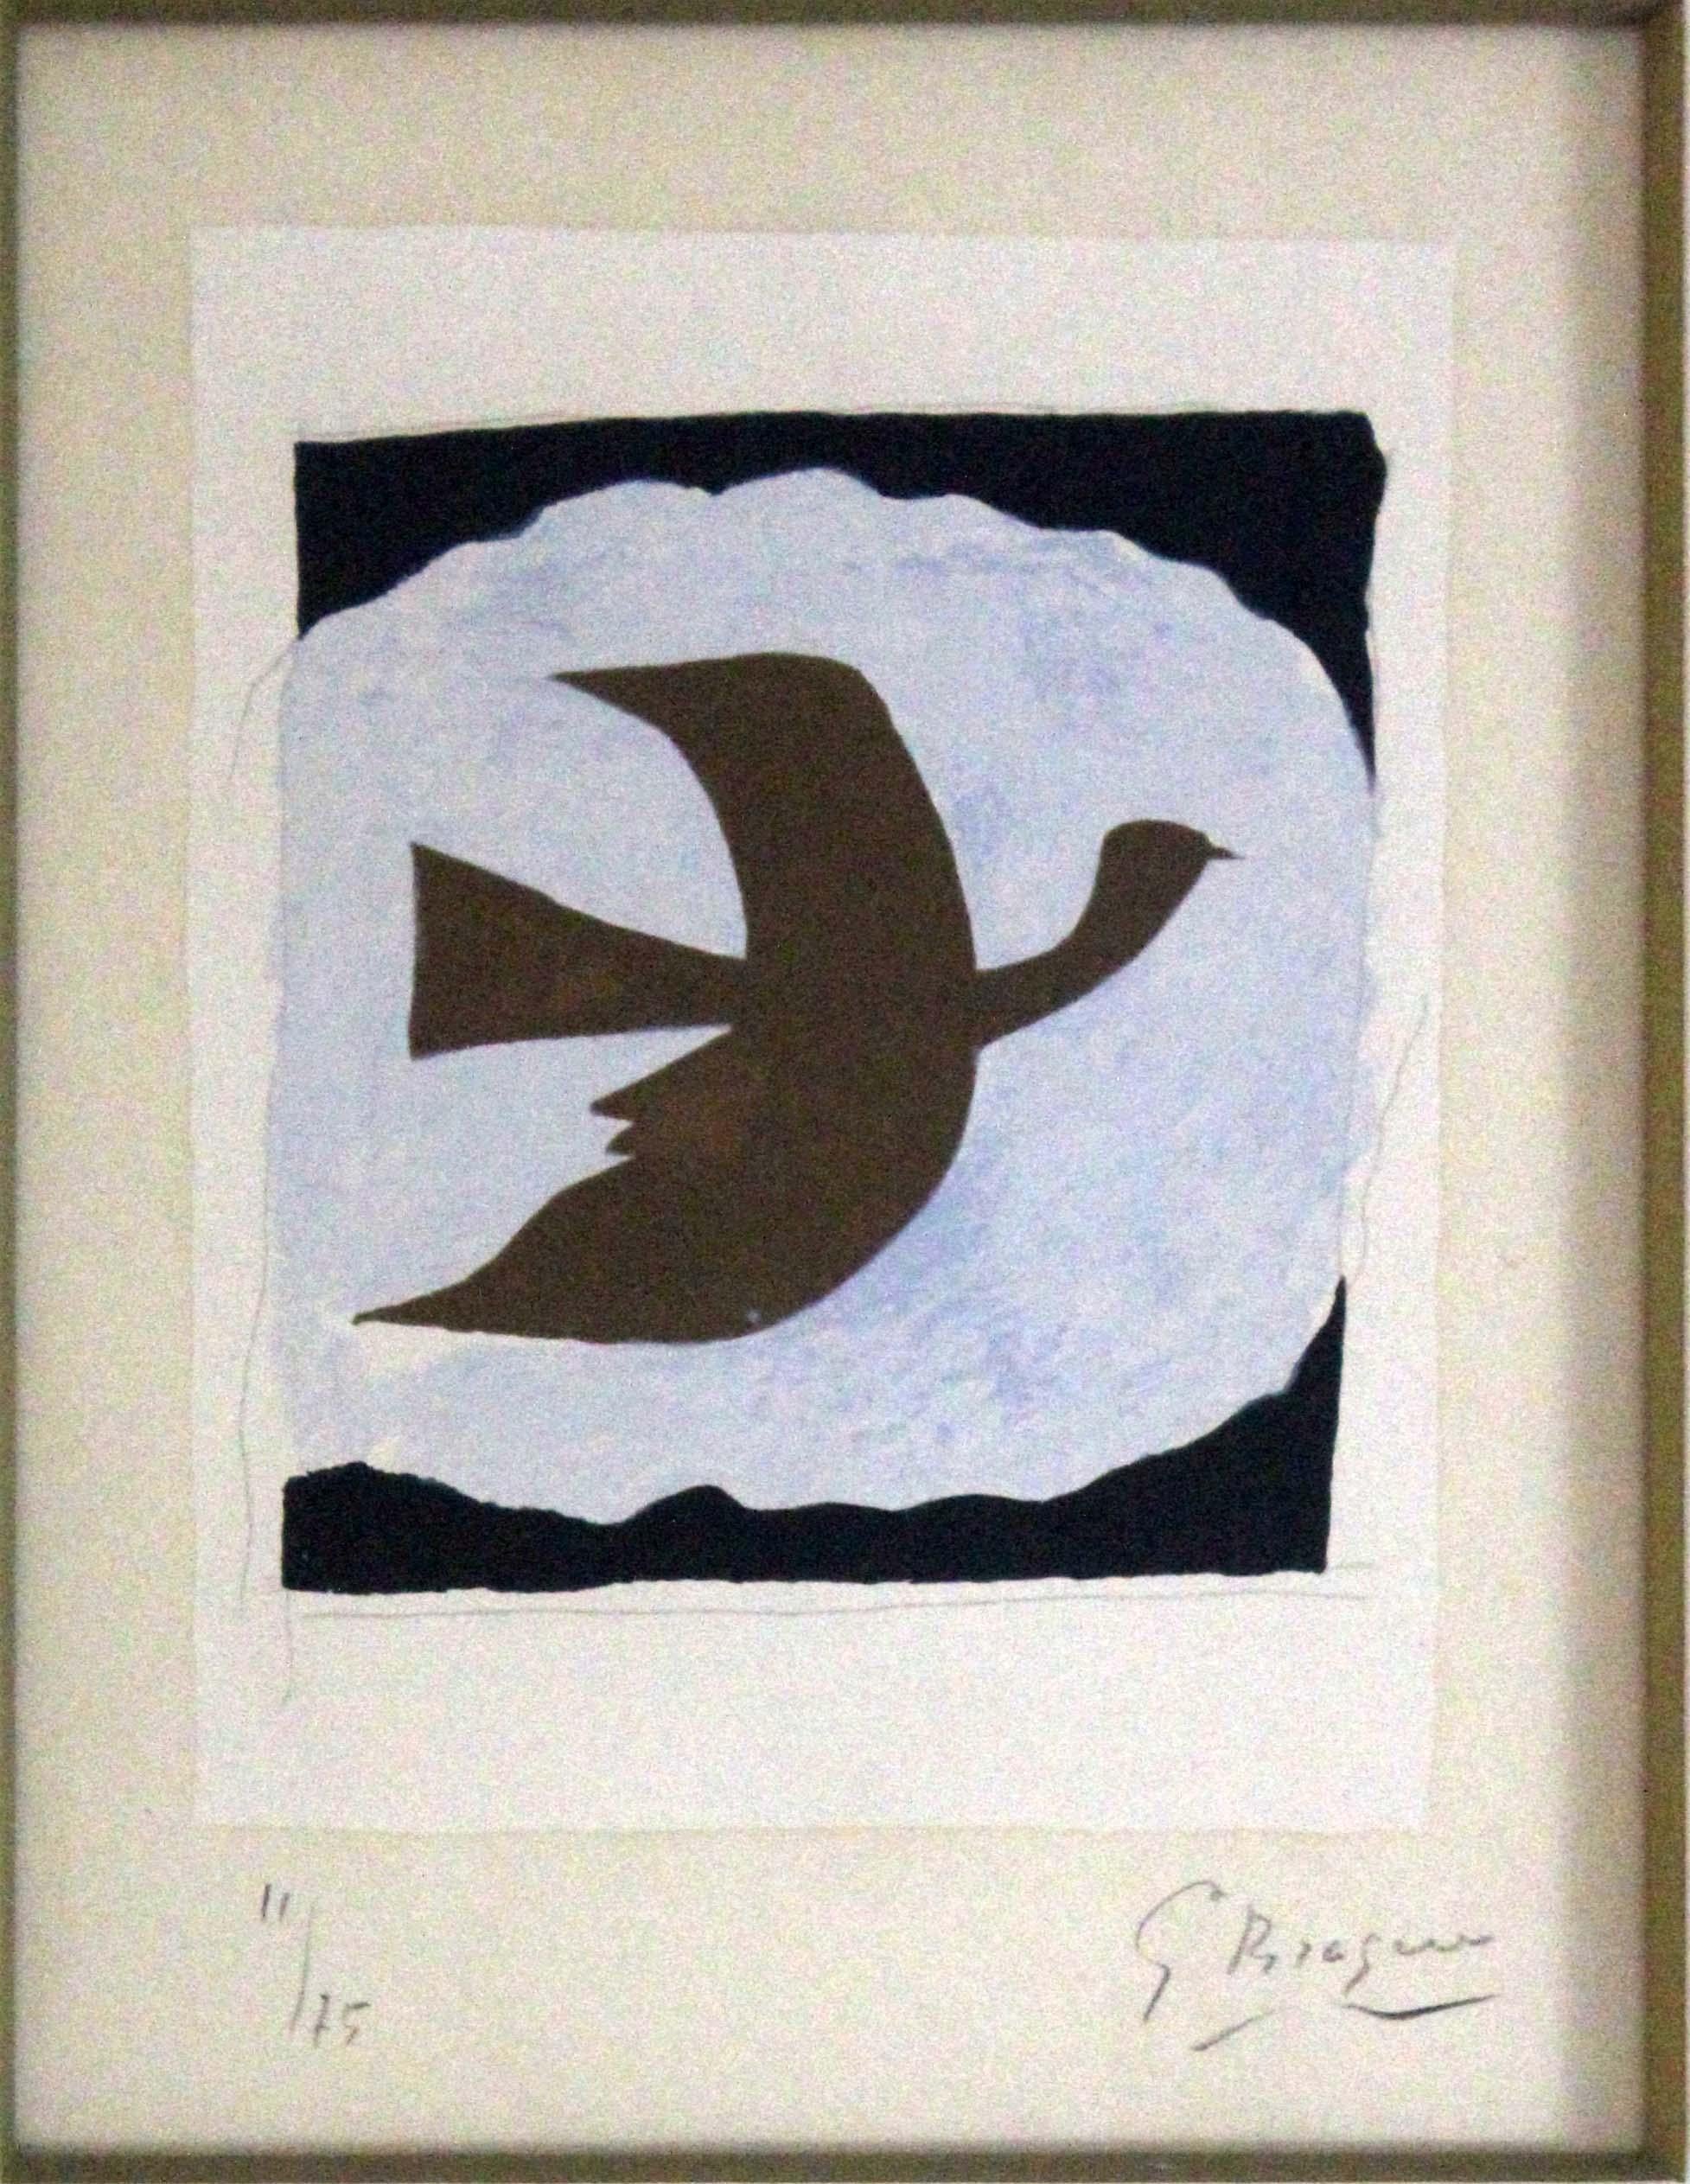 A marvelous modern lithograph on Rives paper titled Oiseau Bistro 1960 by George Braque. Hand signed in pencil on the bottom right with an annotation of 11/75 on the bottom left. The subject of the print is a flying bird in Braque’s signature cubist